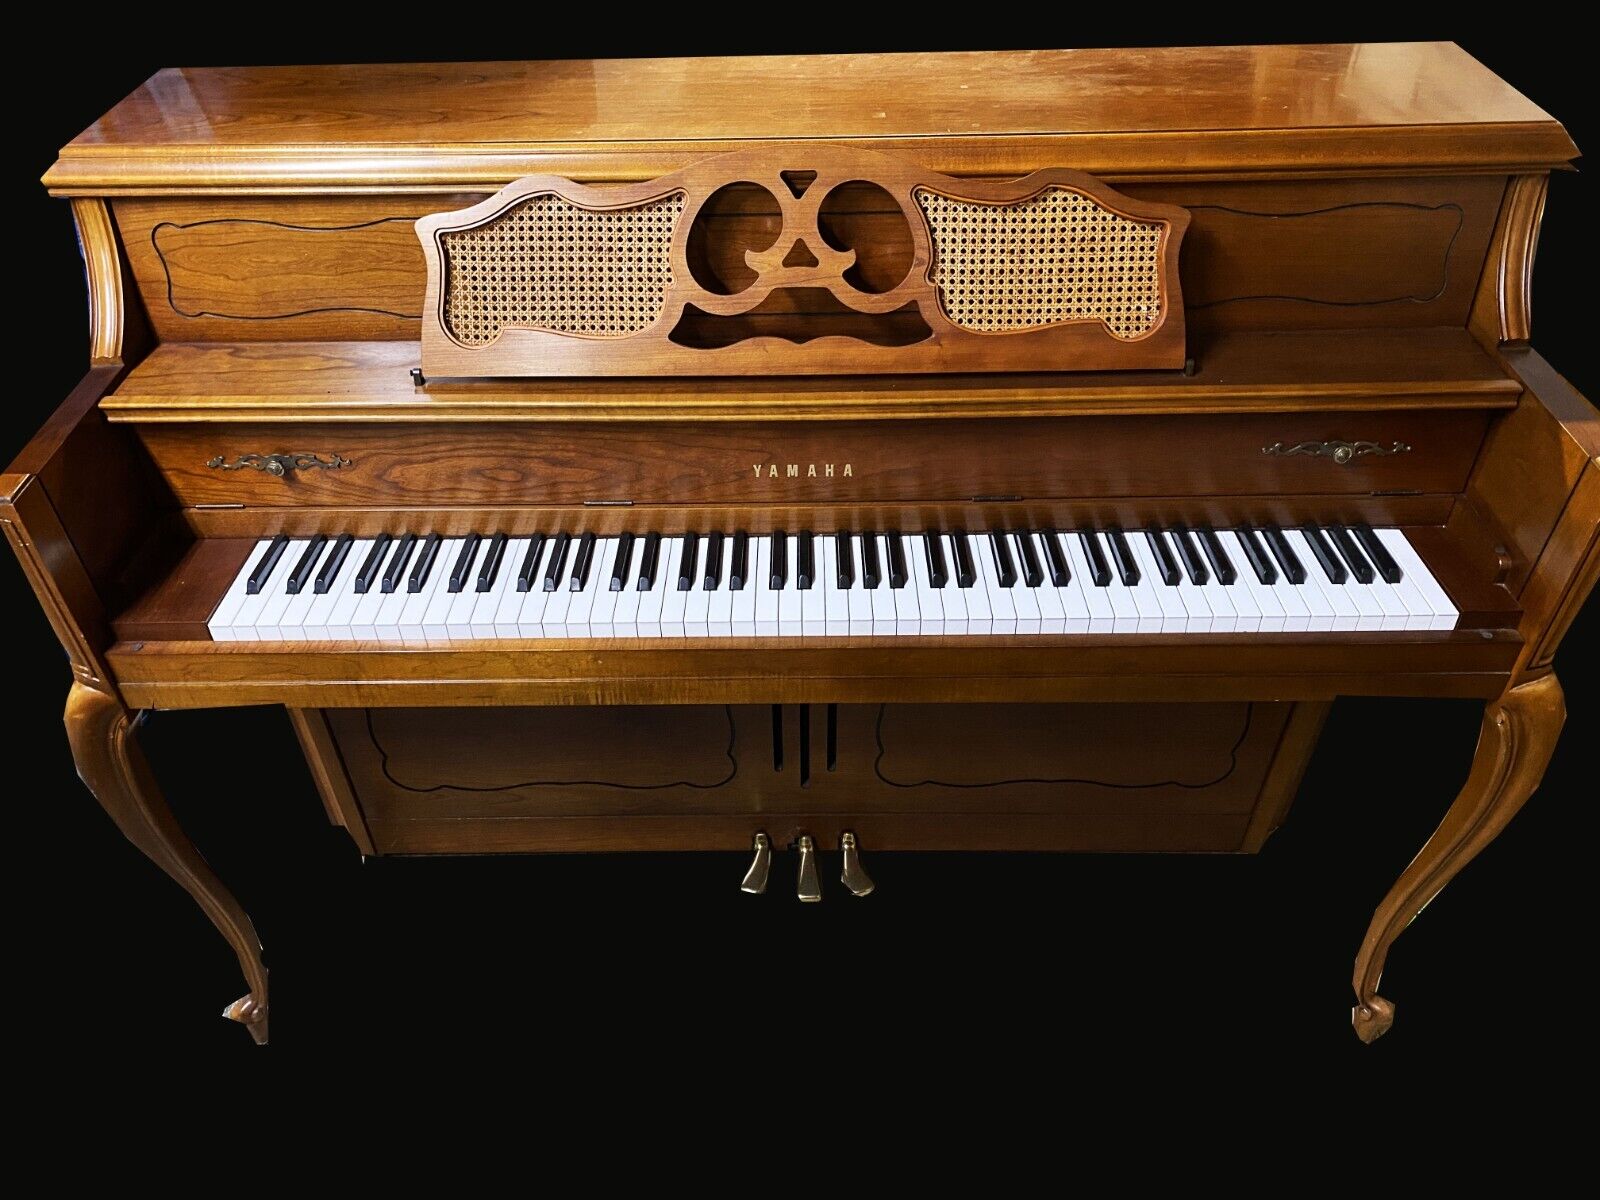 
G3 Yamaha Piano: An In-Depth Review of This Classic Instrument